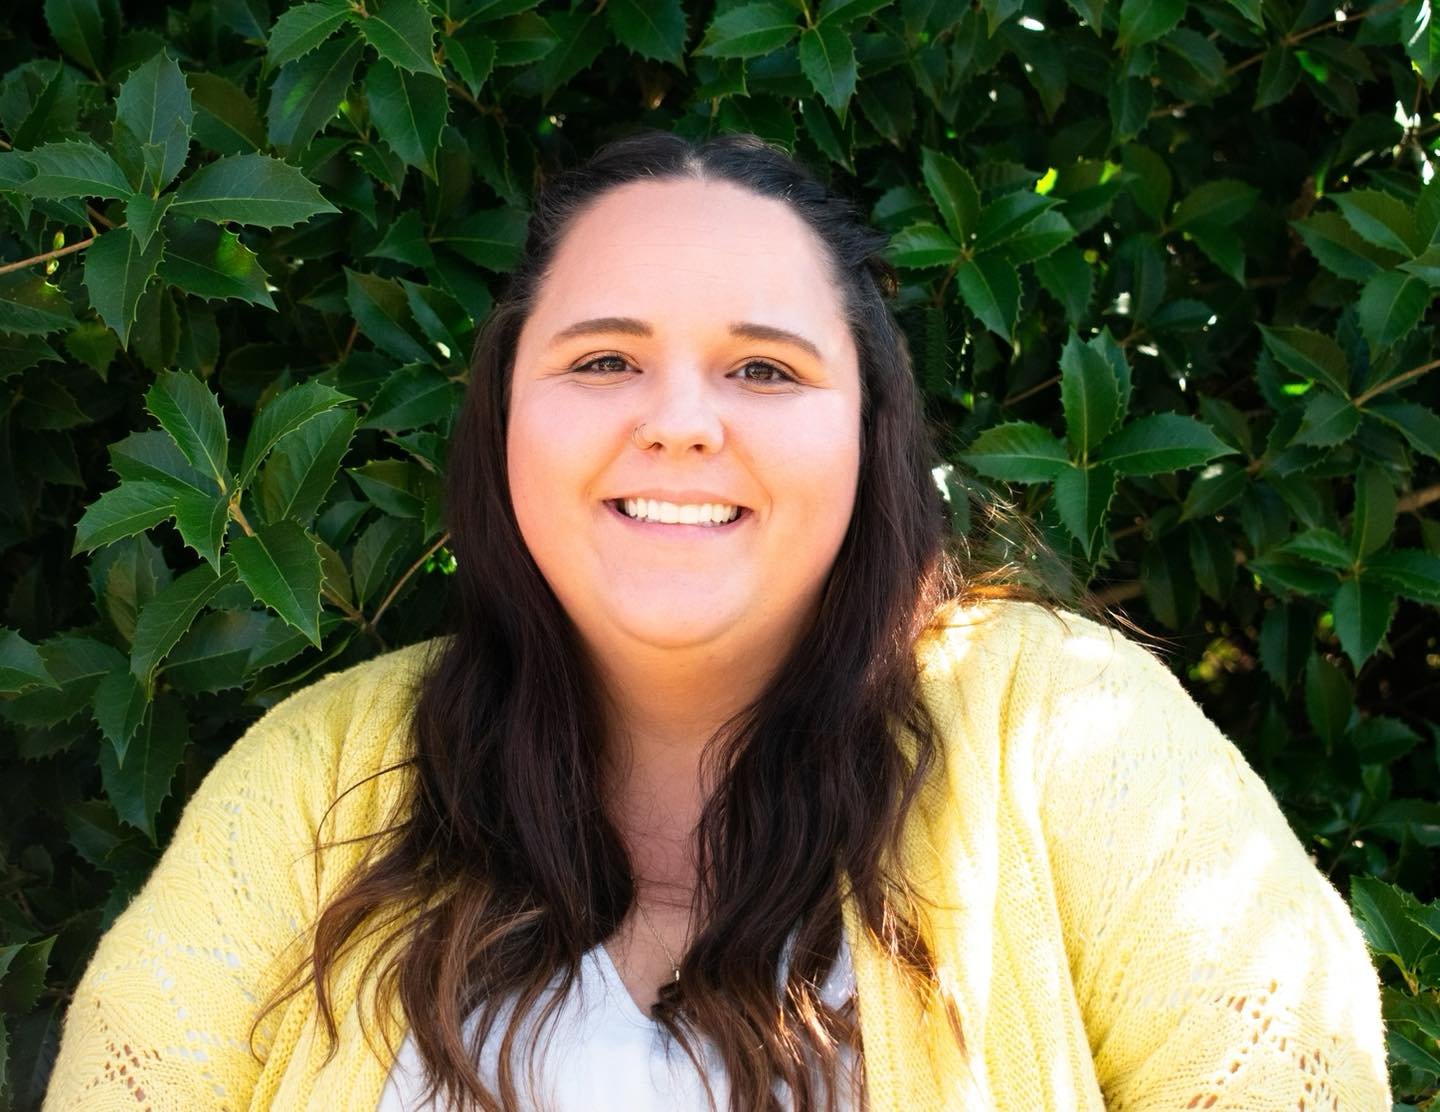 Celebrating Women in Horticulture week (5/27-6/3)  by shedding a light on some of the amazing women we have working at New Garden! Today's spotlight is Emily Jennings.

She began her  journey at New Garden by chance. Emily had no experience in the ho